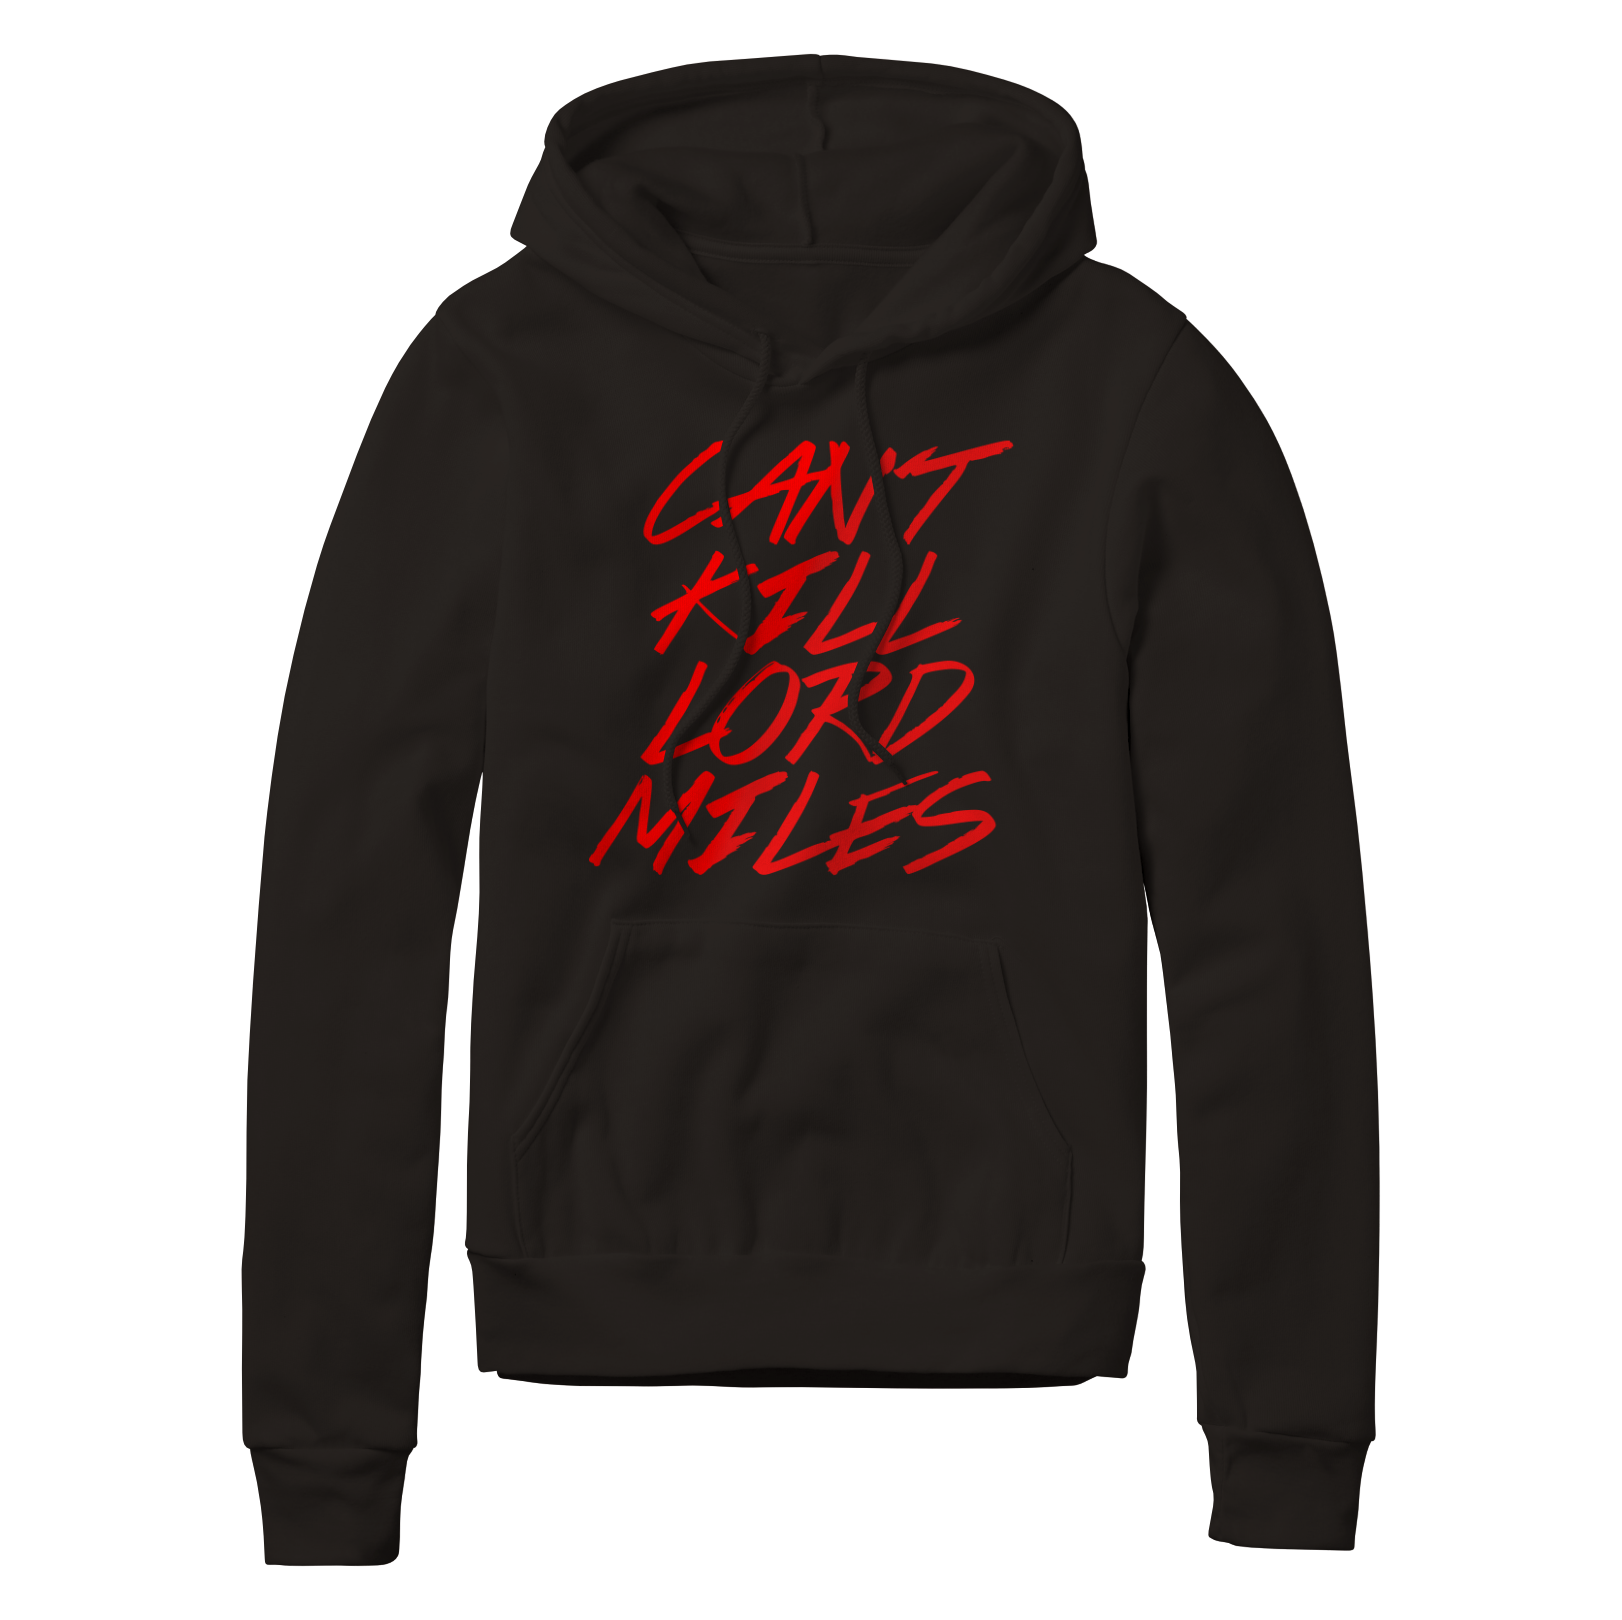 Cant Kill Lord Miles (Red) Hoodie